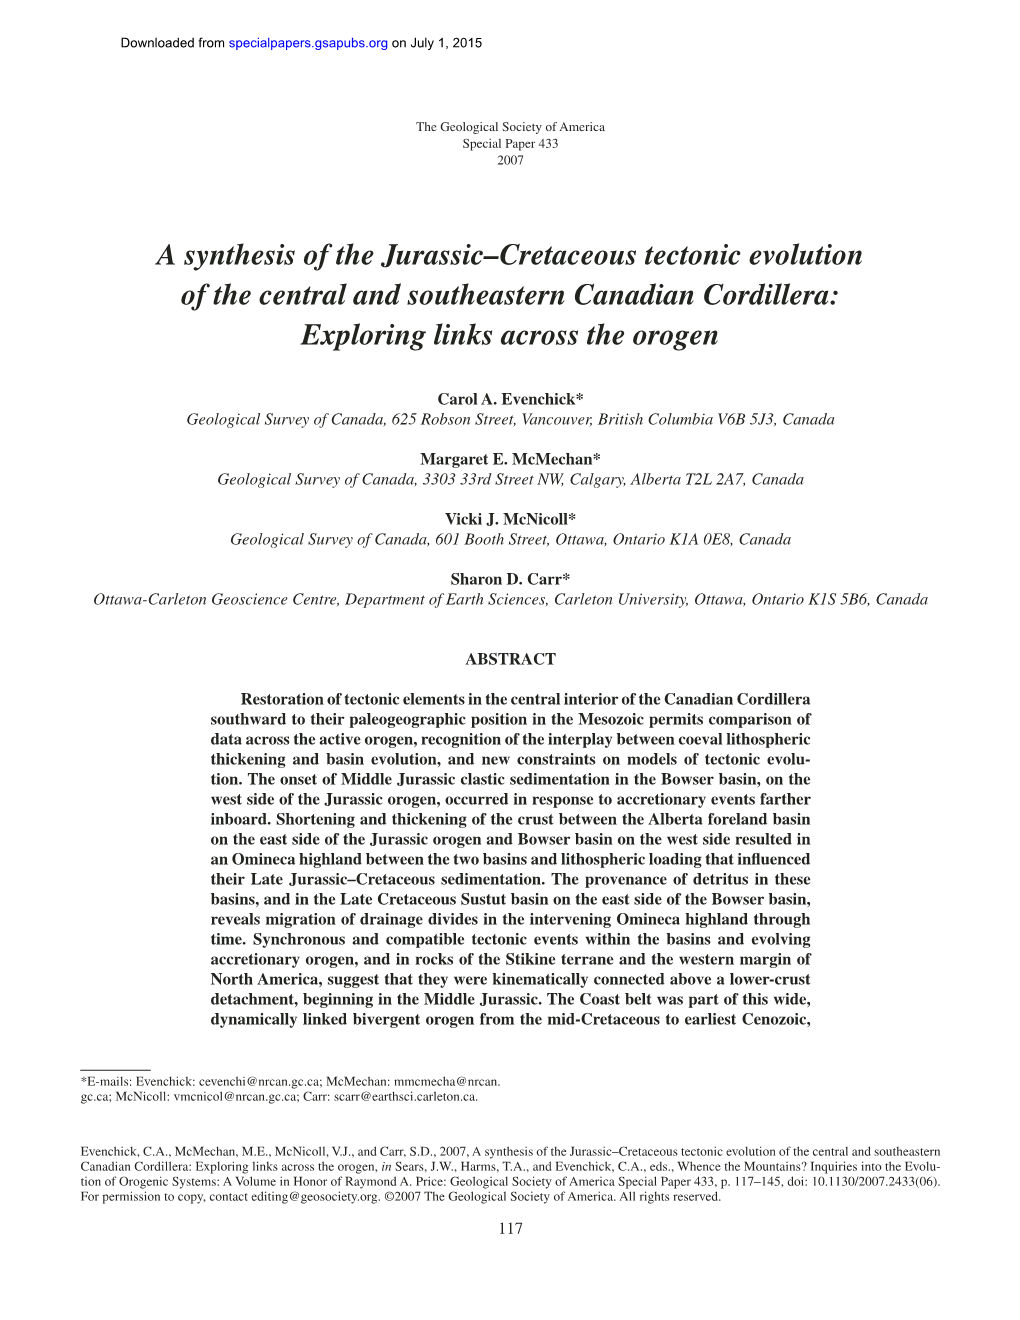 A Synthesis of the Jurassic–Cretaceous Tectonic Evolution of the Central and Southeastern Canadian Cordillera: Exploring Links Across the Orogen